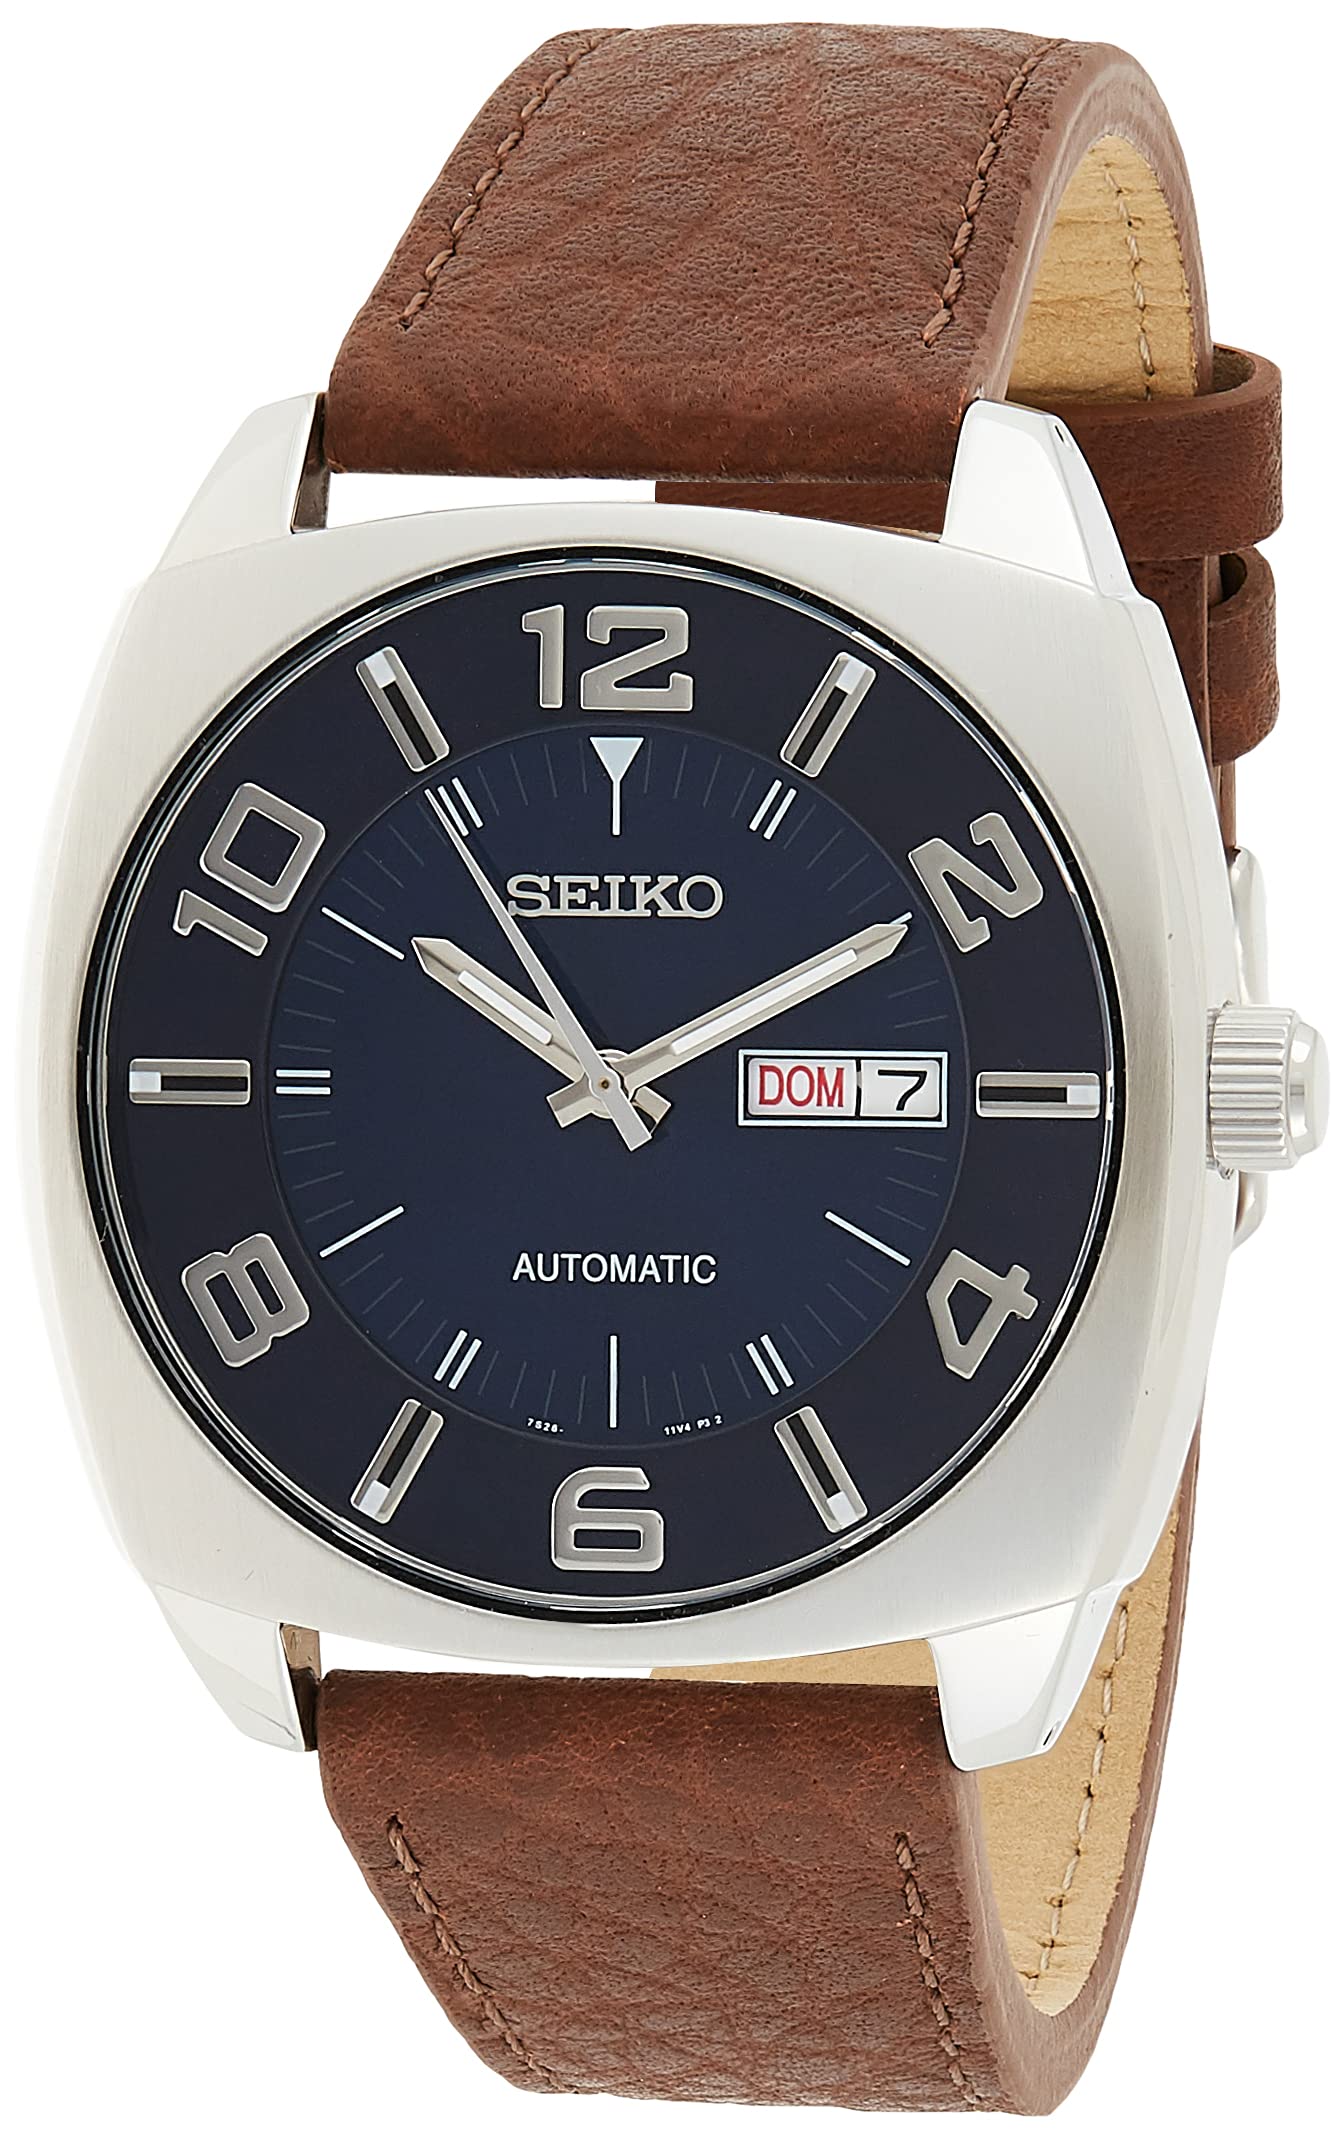 Seiko Men's SNKN37 Stainless Steel Automatic Self-Wind Watch with Brown Leather Band - $108.98 at Amazon